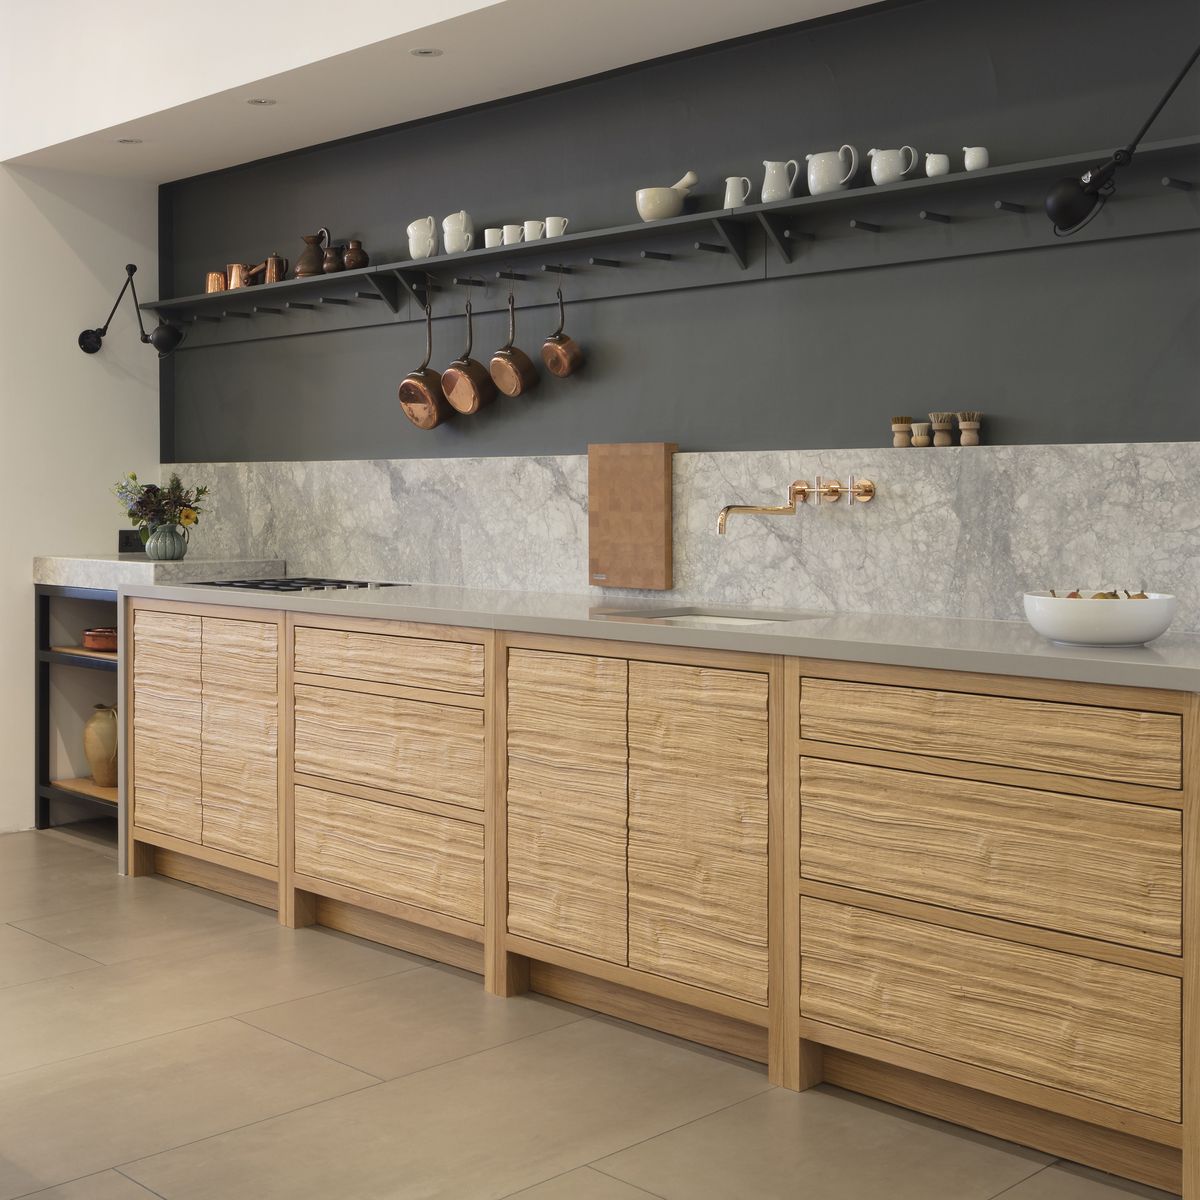 28 Stunning Kitchen Cabinet Designs Be Inspired With Our Round Up